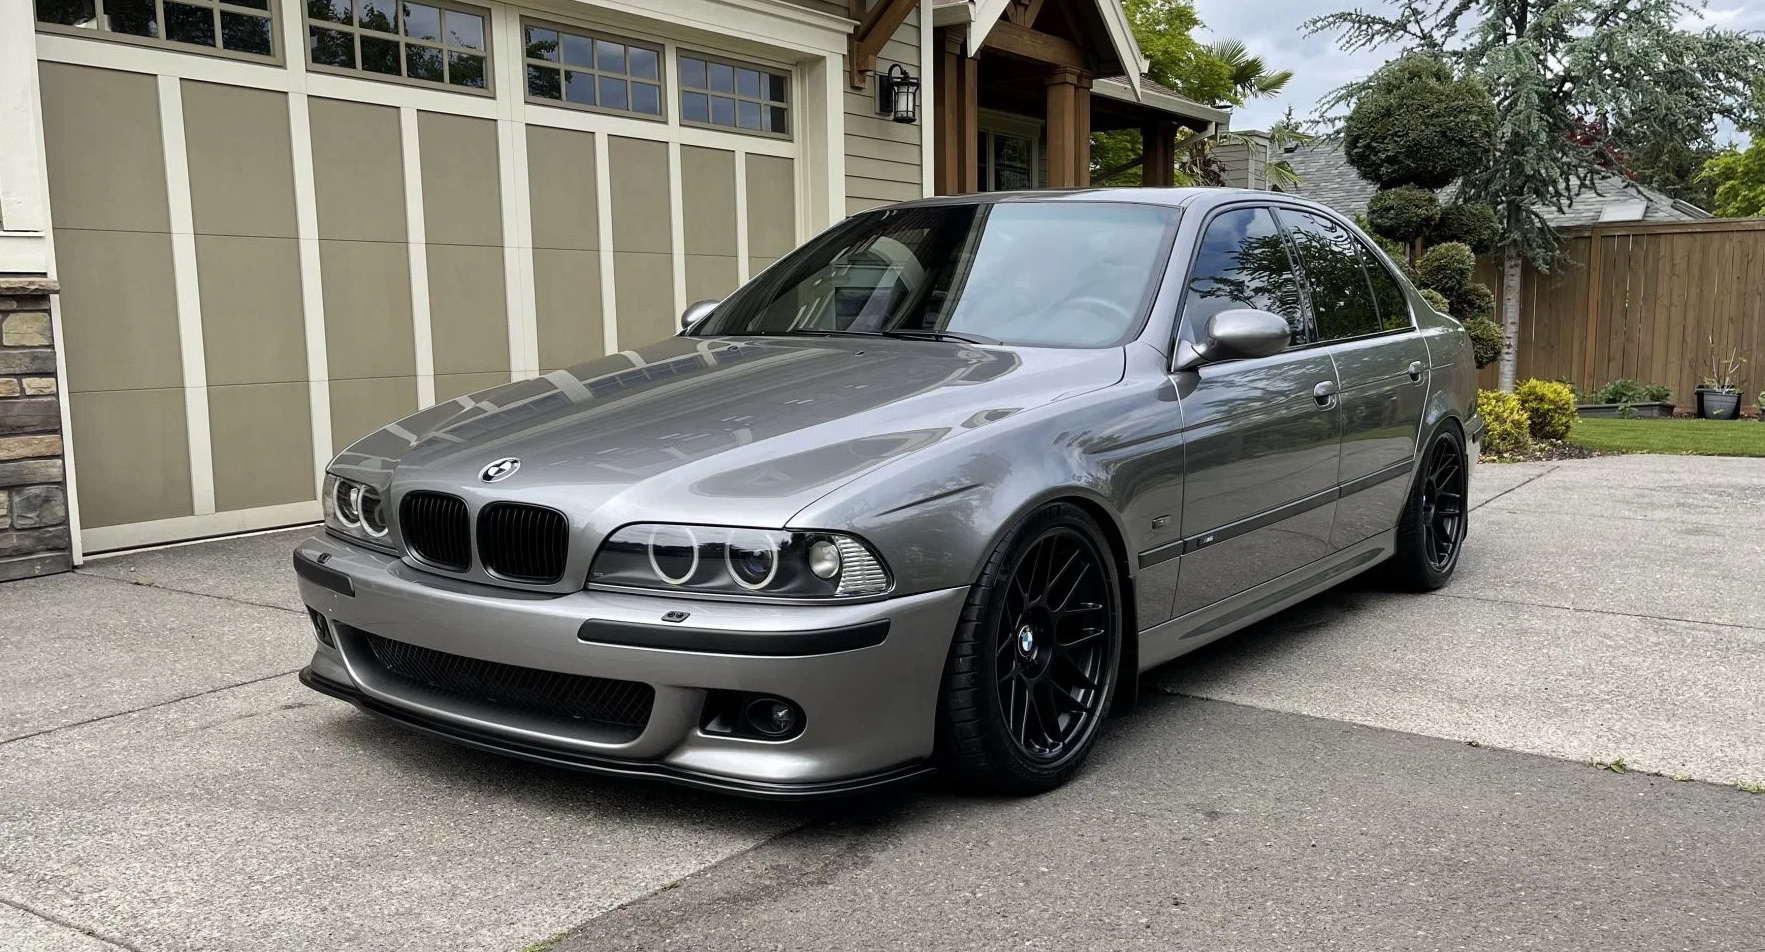 https://s1.cdn.autoevolution.com/images/news/tuned-e39-bmw-m5-up-for-grabs-with-several-awesome-interior-and-exterior-mods-163018_1.jpg